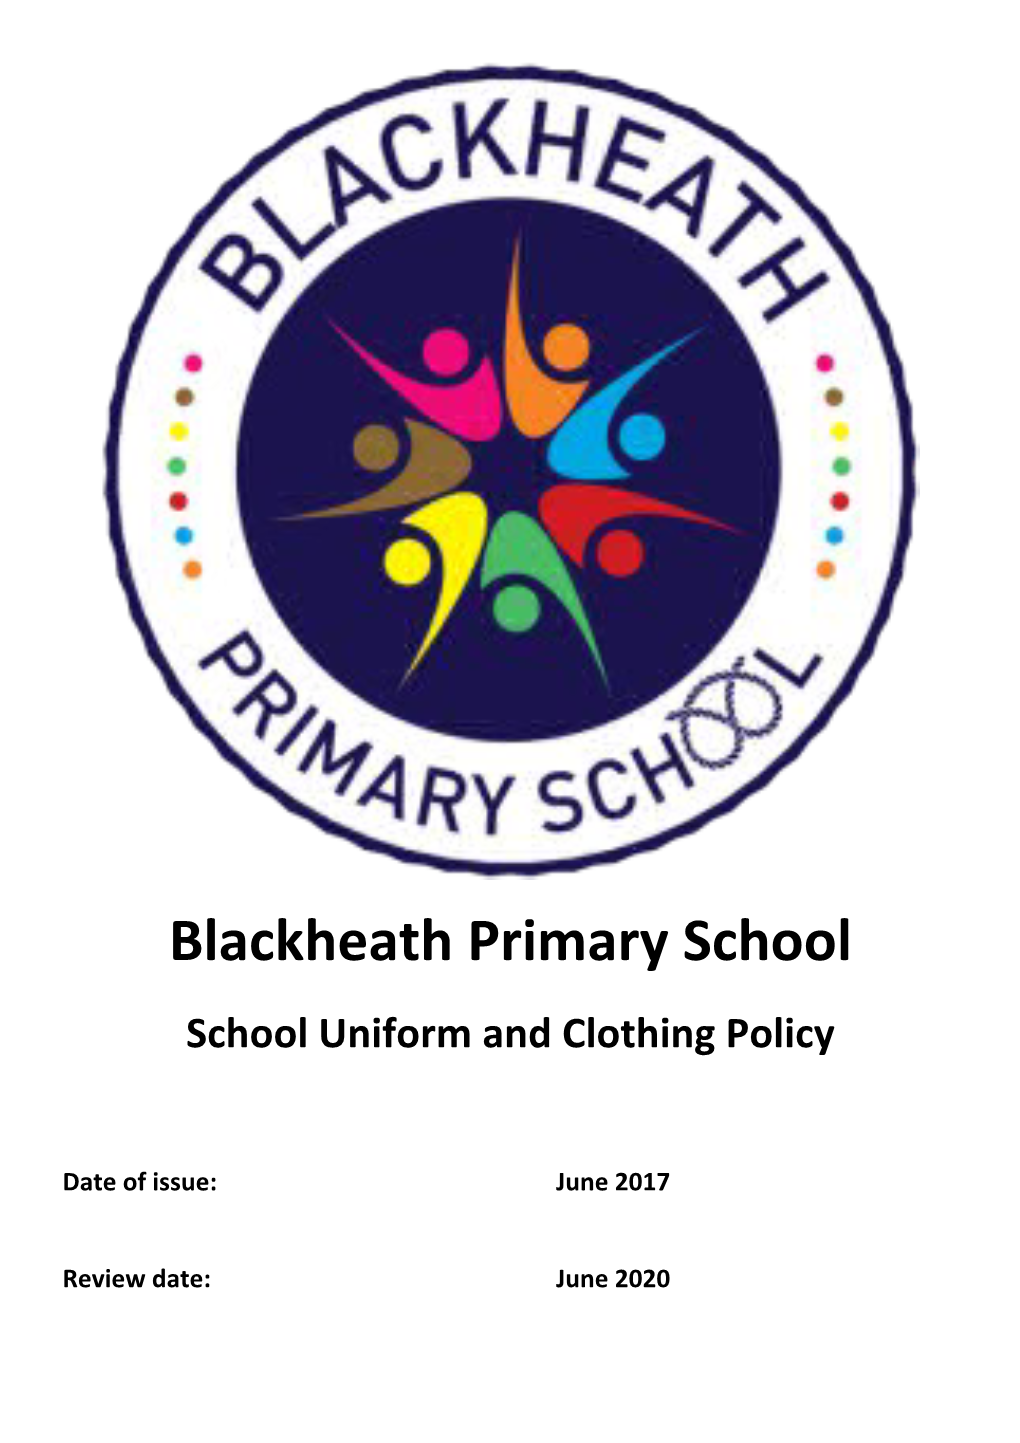 School Uniform and Clothing Policy